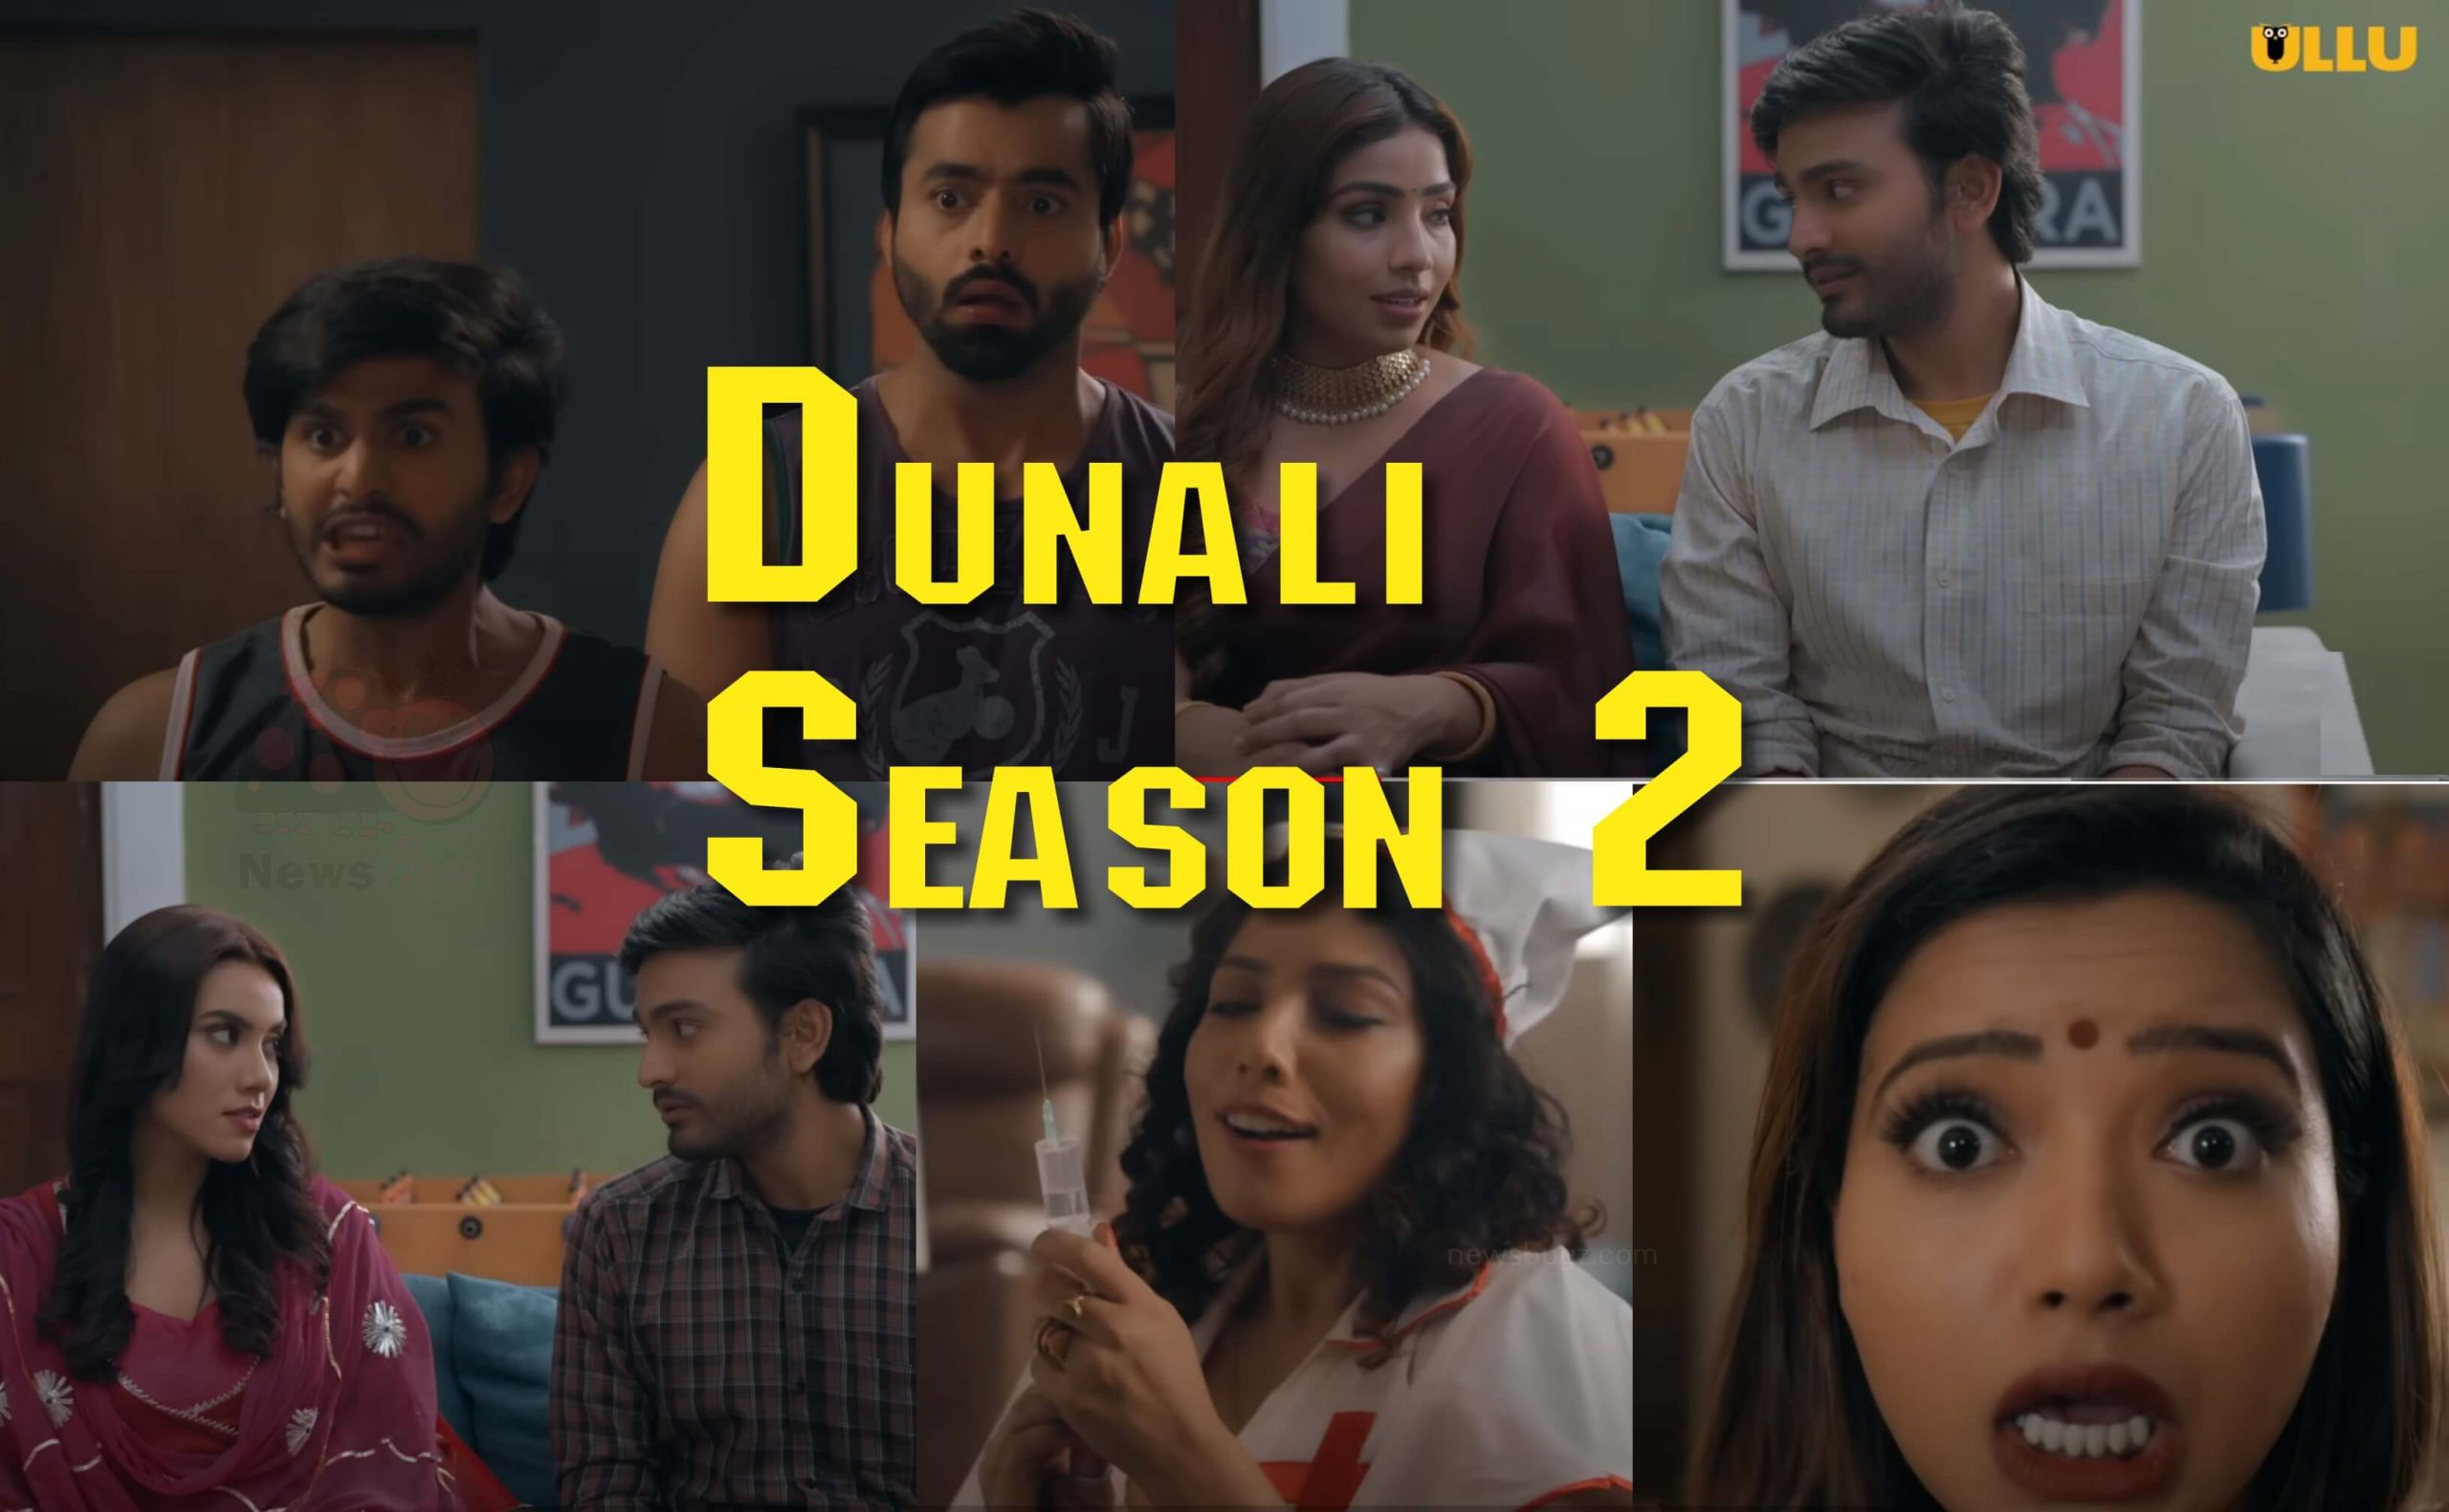 Watch Dunali Season 2 ULLU Web Series All Episodes Download Online Cast Real Name Storyline More